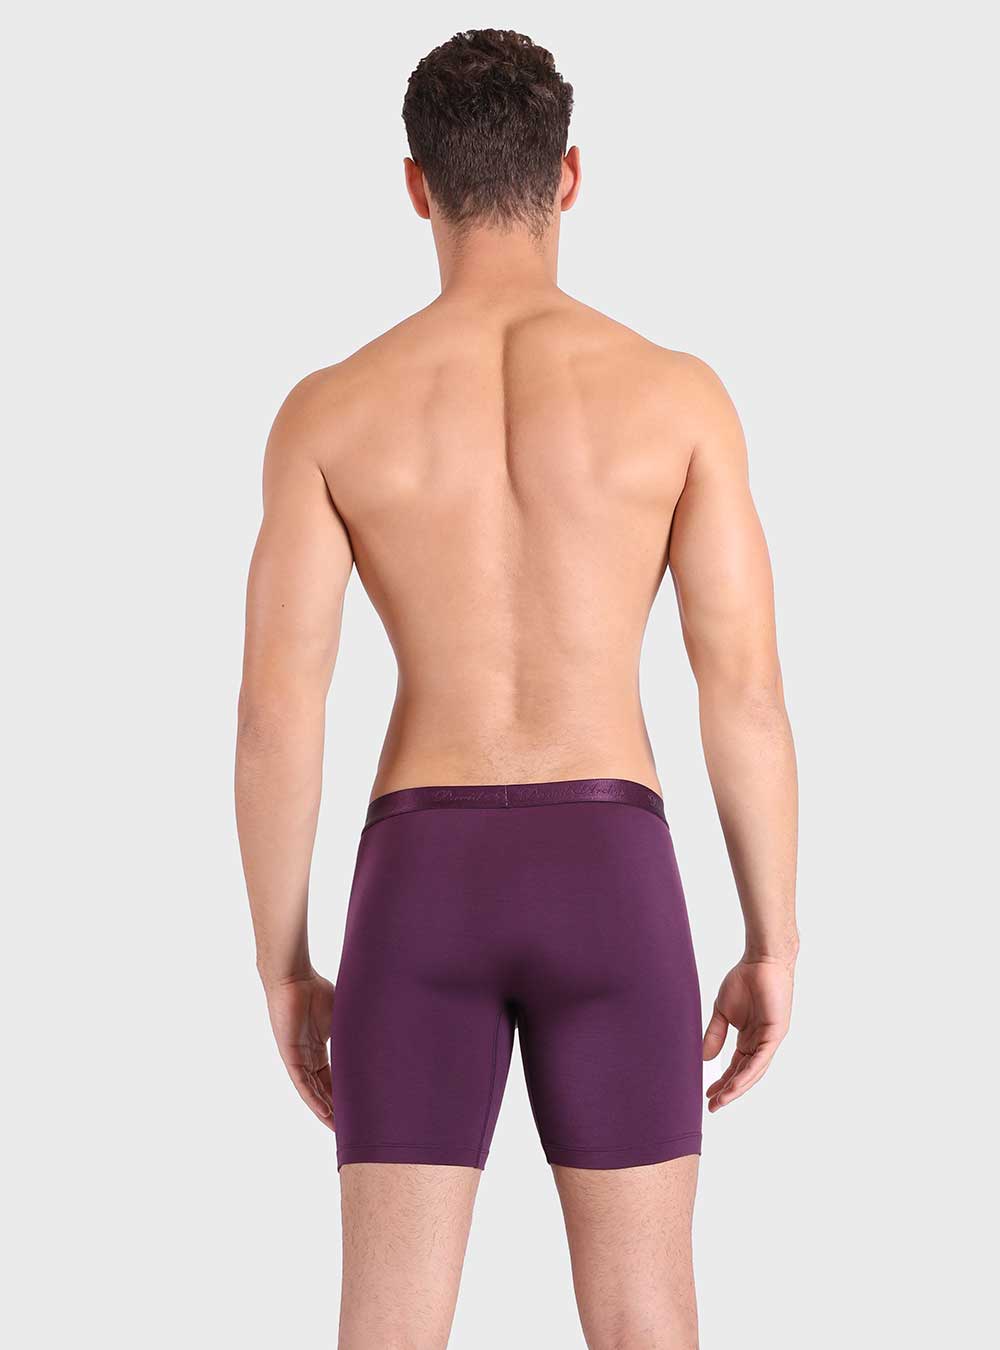 ABananaCover Premium Men's Naked Feeling Air Micro Modal Boxer Briefs -  Superior To Cotton Underwear - 3X Softer Than Cotton - 3 Snug-Fit  Athleisure Mens Underwear Trunks - Nickel Violet, Small at